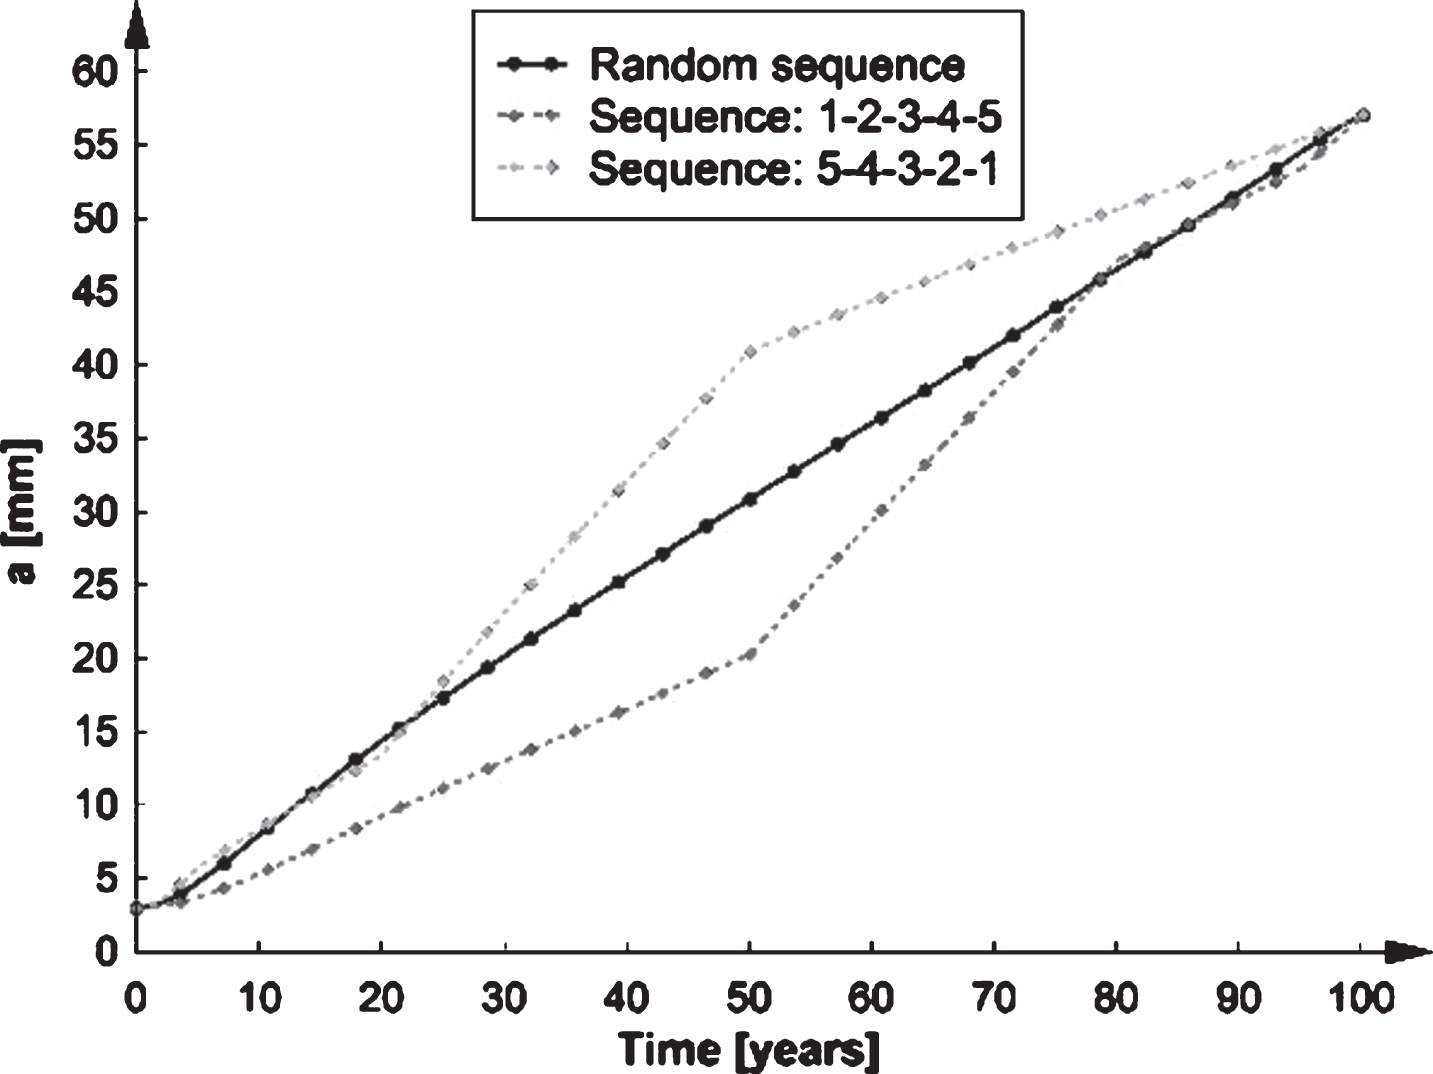 Random sequence of applied loads versus fixed sequences.